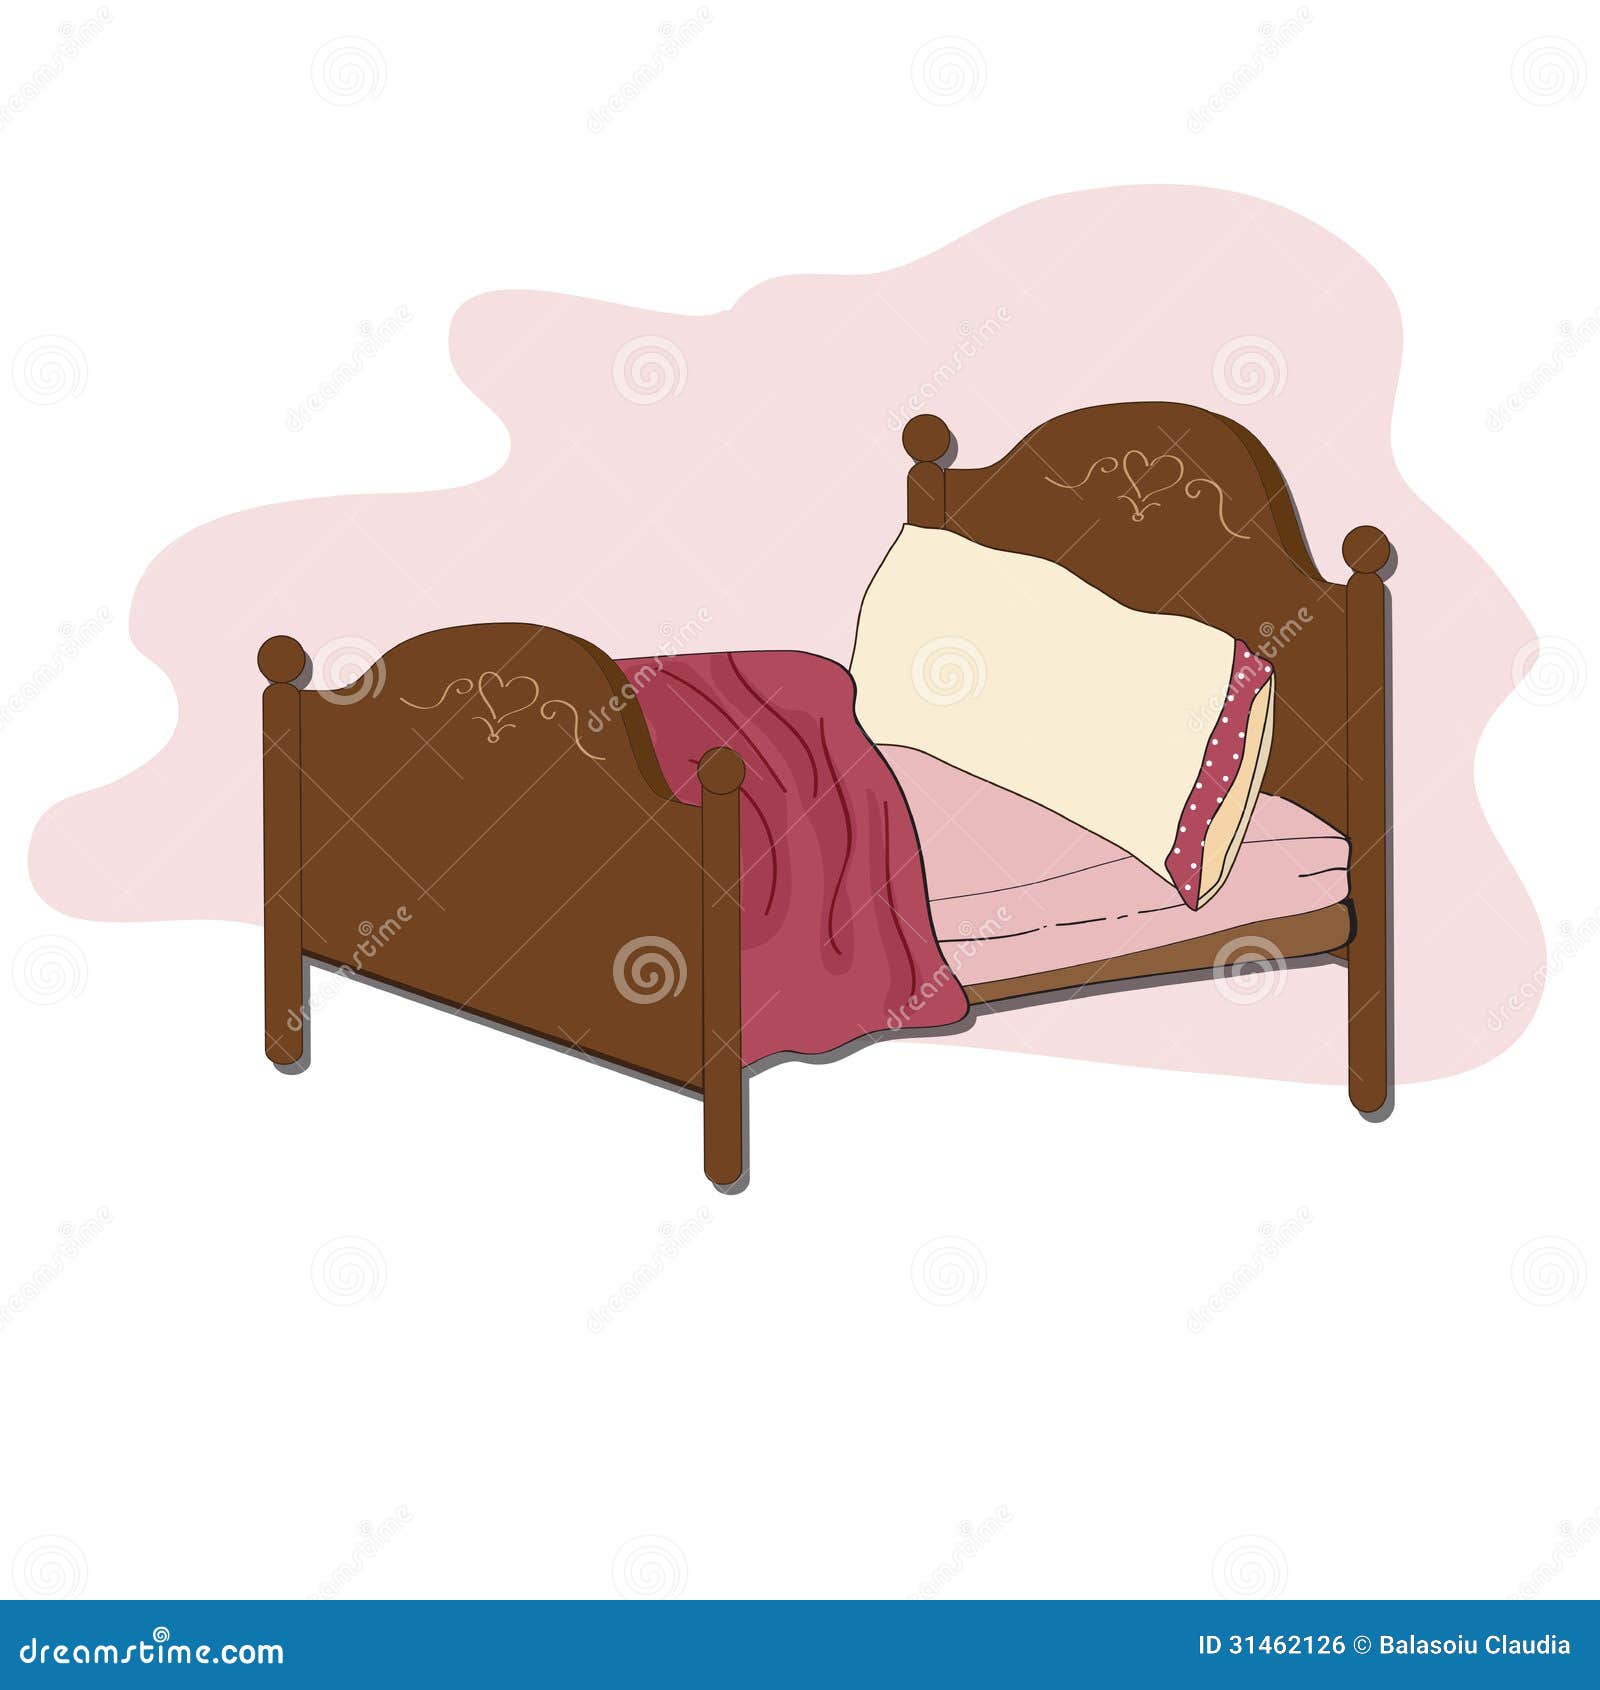 illustration Cartoon wooden bed pics, Stock Photos all sites